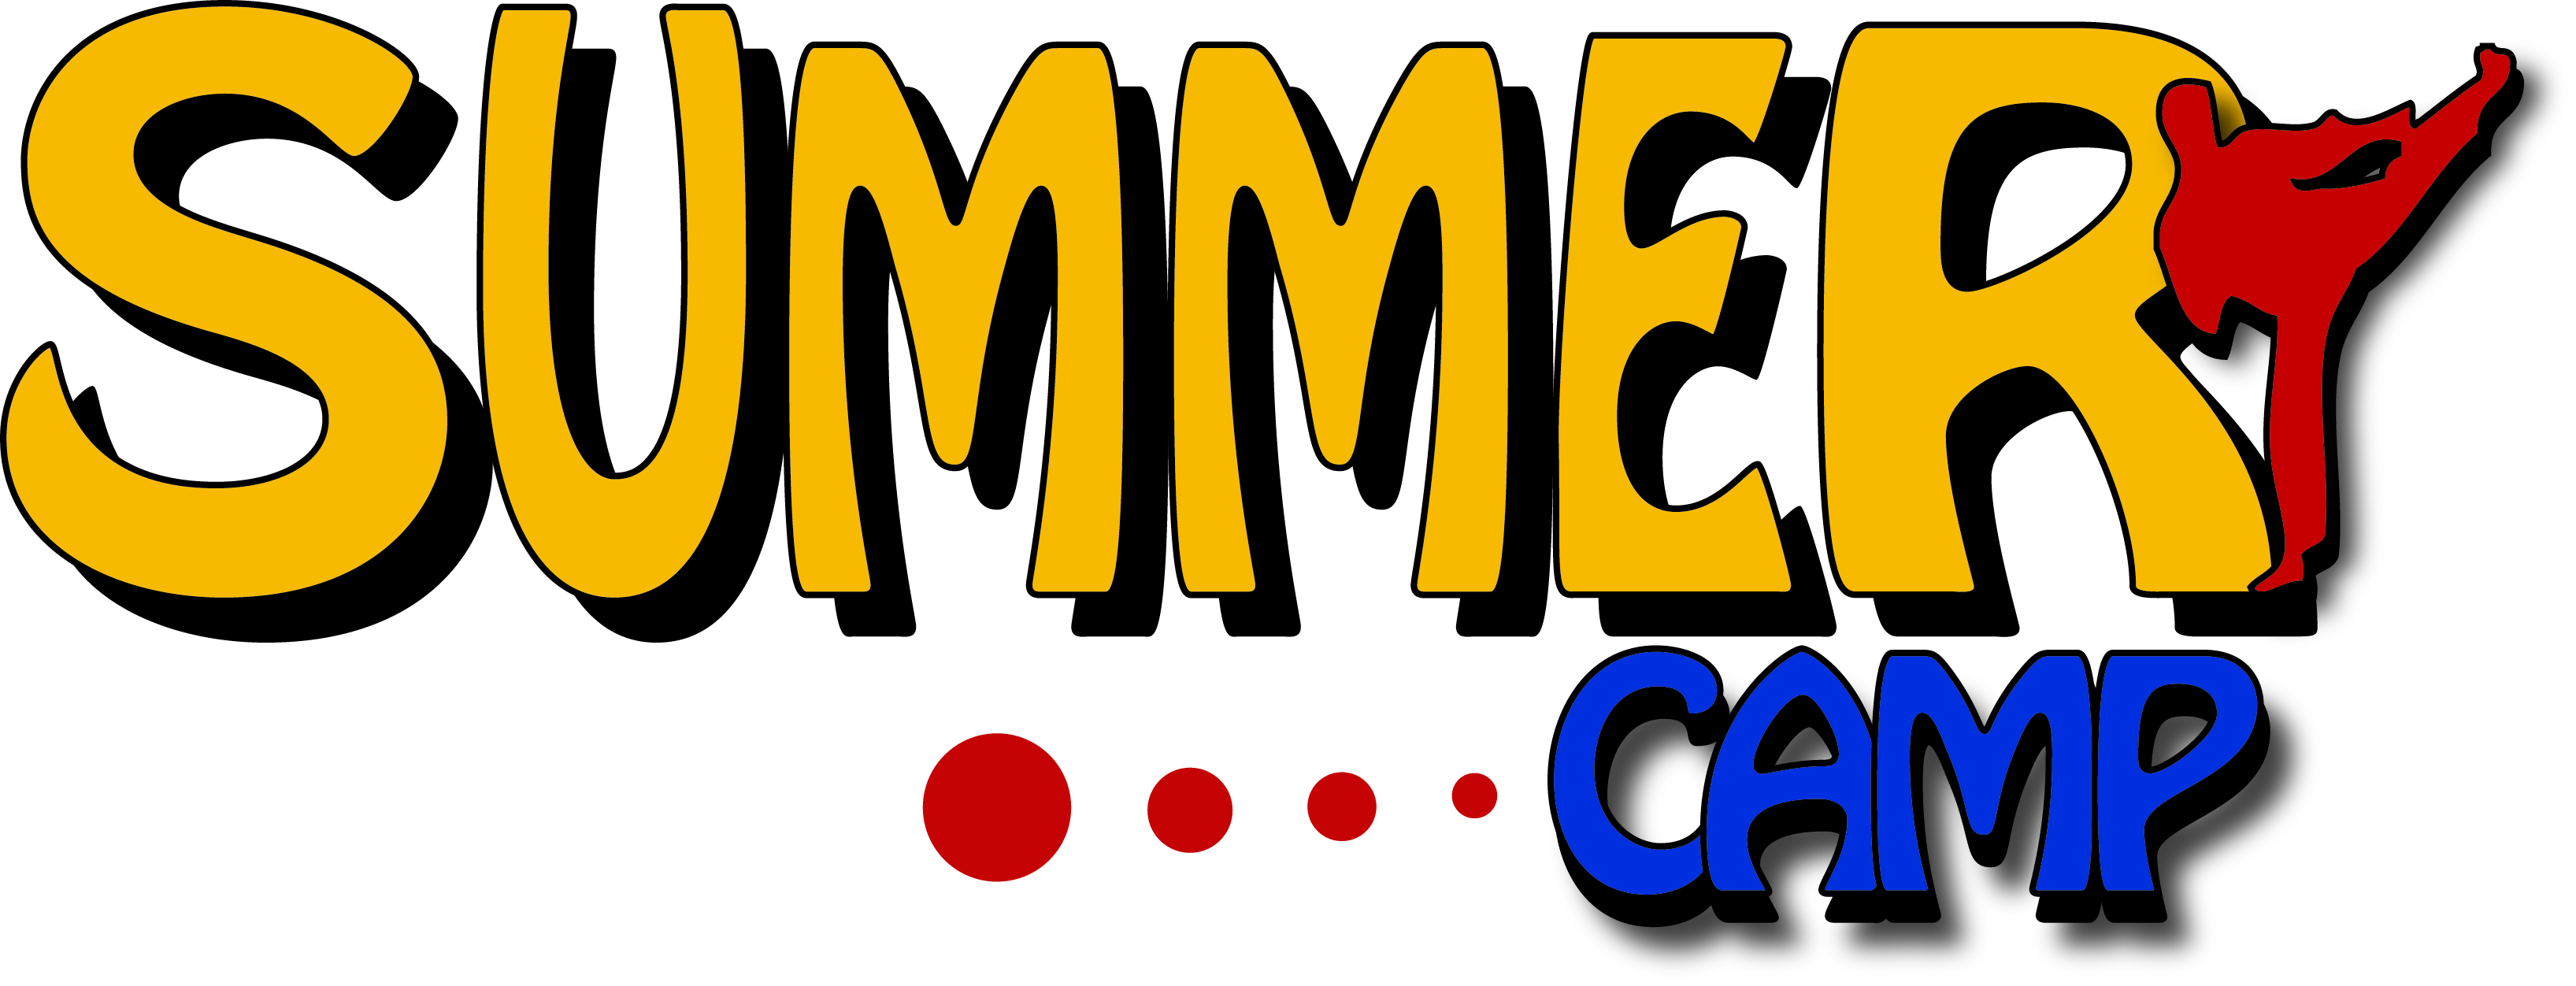 free summer camp clipart - photo #40